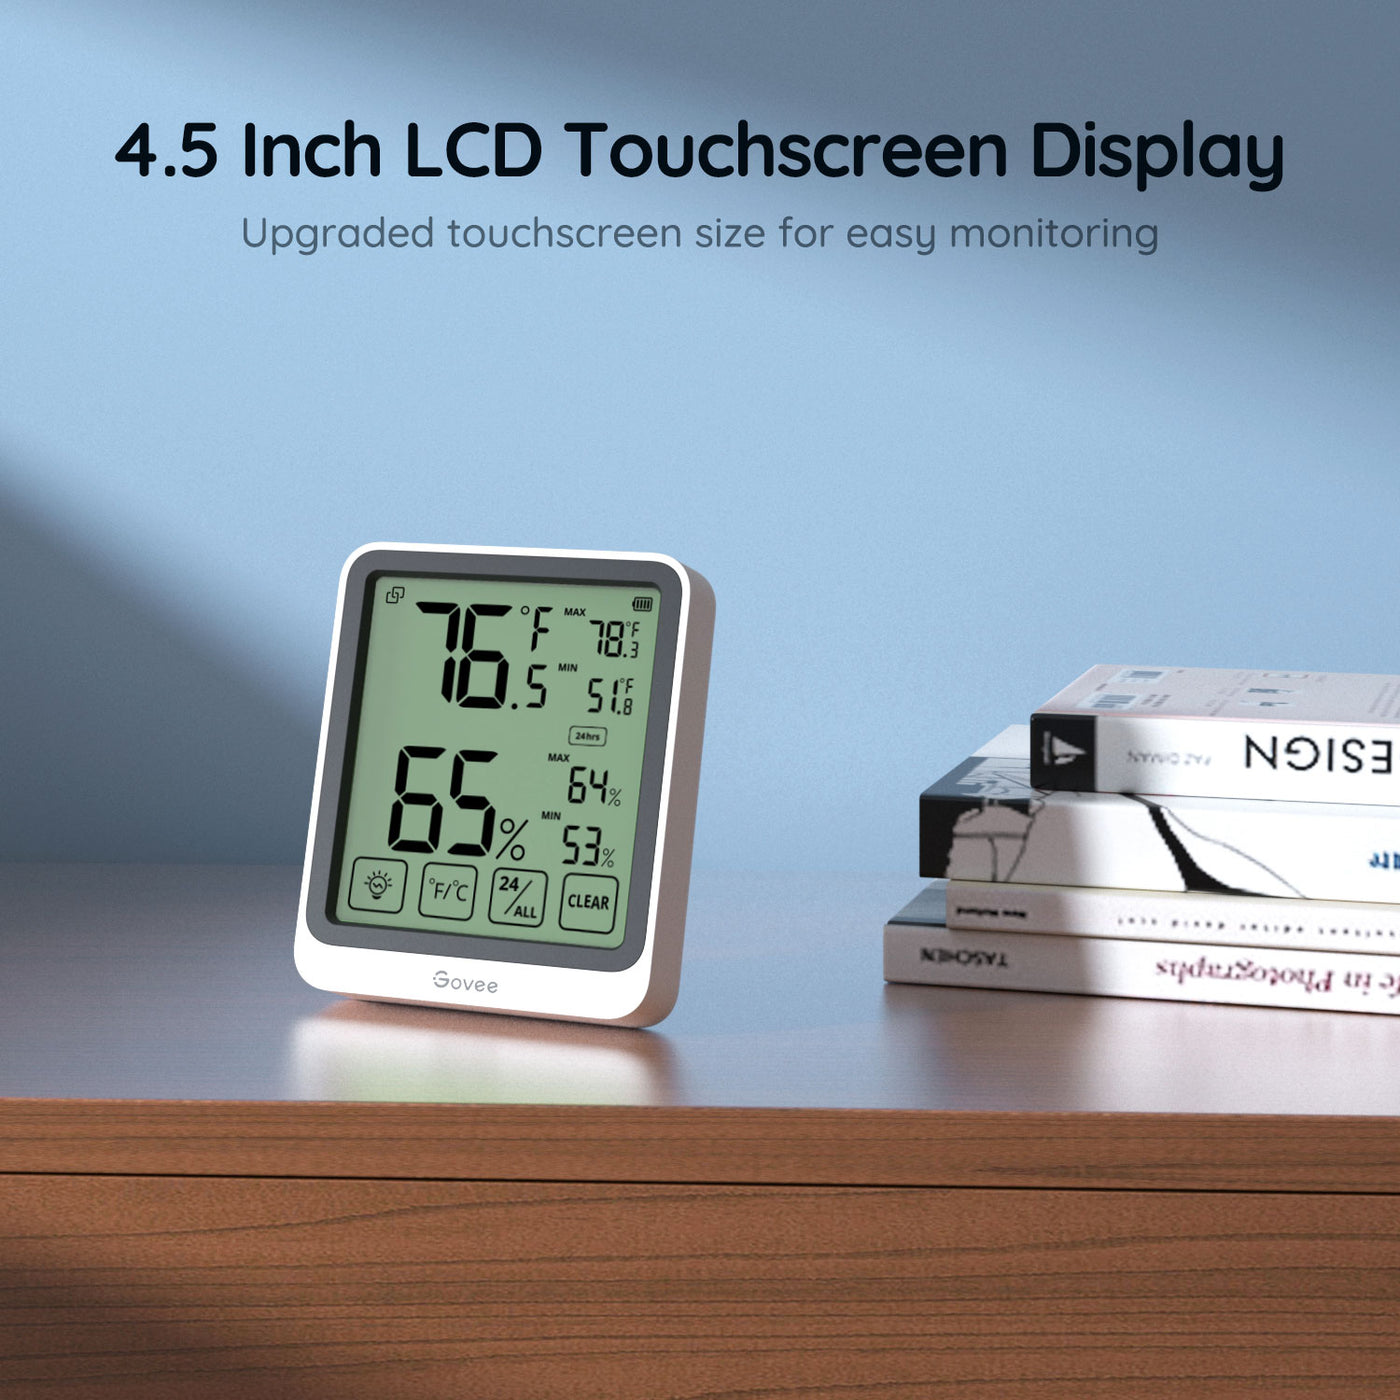 Govee Bluetooth Thermo-Hygrometer Touch Screen